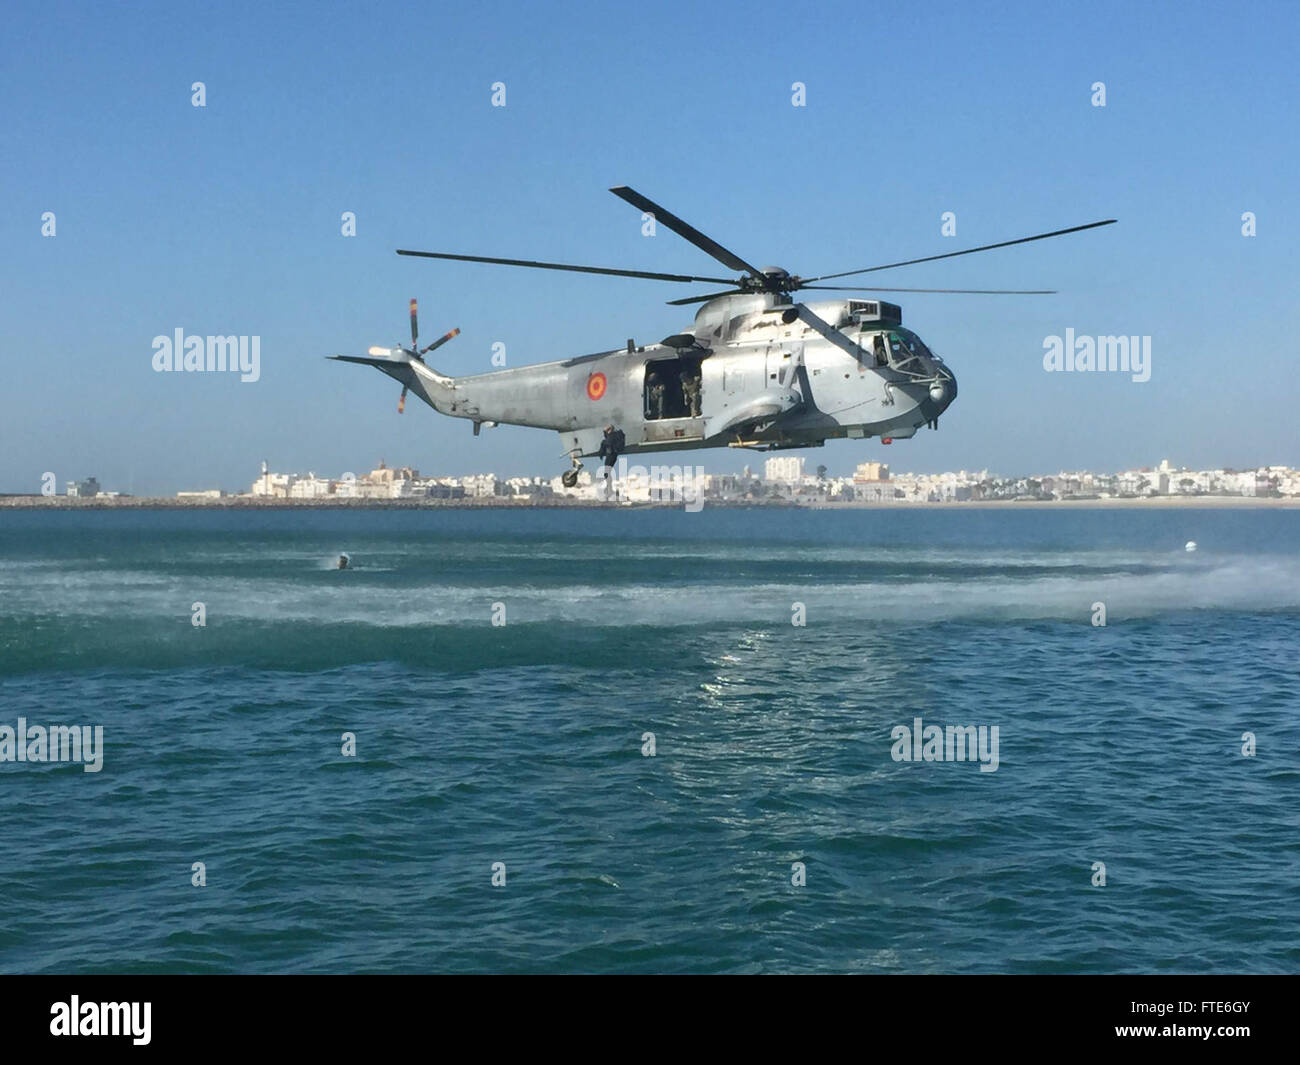 151119-N-ZZ999-775 NAVAL STATION ROTA, Spain (Nov. 19, 2015)  Sailors from Explosive Ordnance Disposal Mobile Unit 8, German navy Minetaucher Kompanie and Spanish Navy Unidads Buceadores MCM jump from a Spanish Navy helicopter into Cadiz Bay off the coast of Rota, Spain, as part of Exercise MAGRE 2015-2, Nov. 19. Exercise MAGRE is a tri-lateral counter improvised explosive device exercise involving Sailors from the U.S. Navy, German navy and hosted by the Spanish navy. (U.S. Navy photo by Explosive Ordnance Disposal Technician 1st Class Jonathan Chapman/ Released) Stock Photo